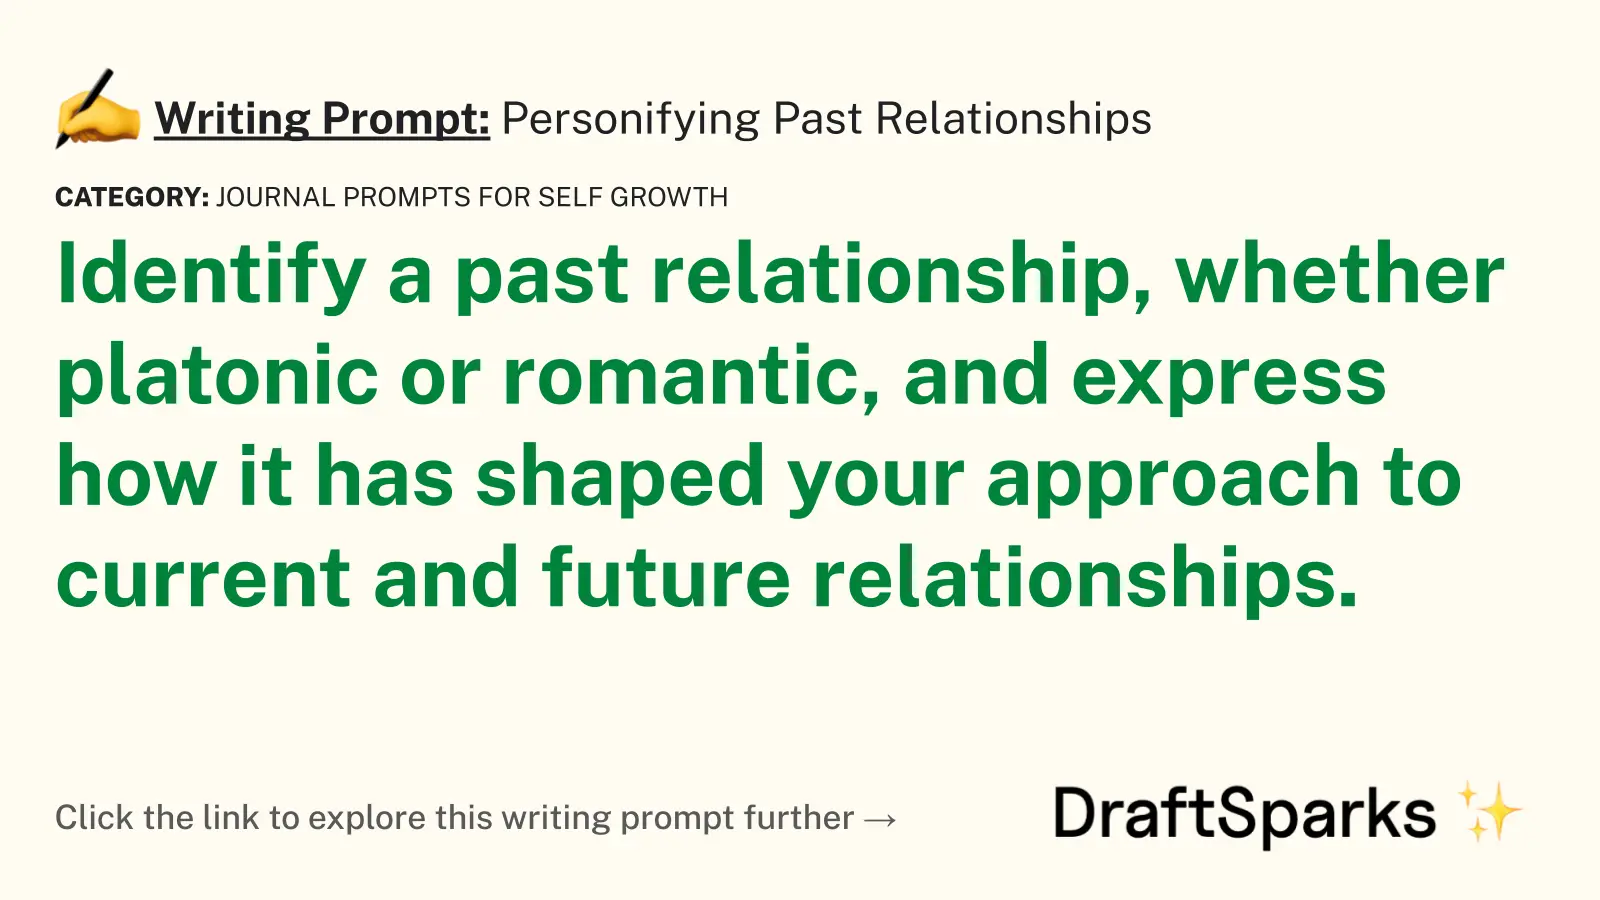 Personifying Past Relationships